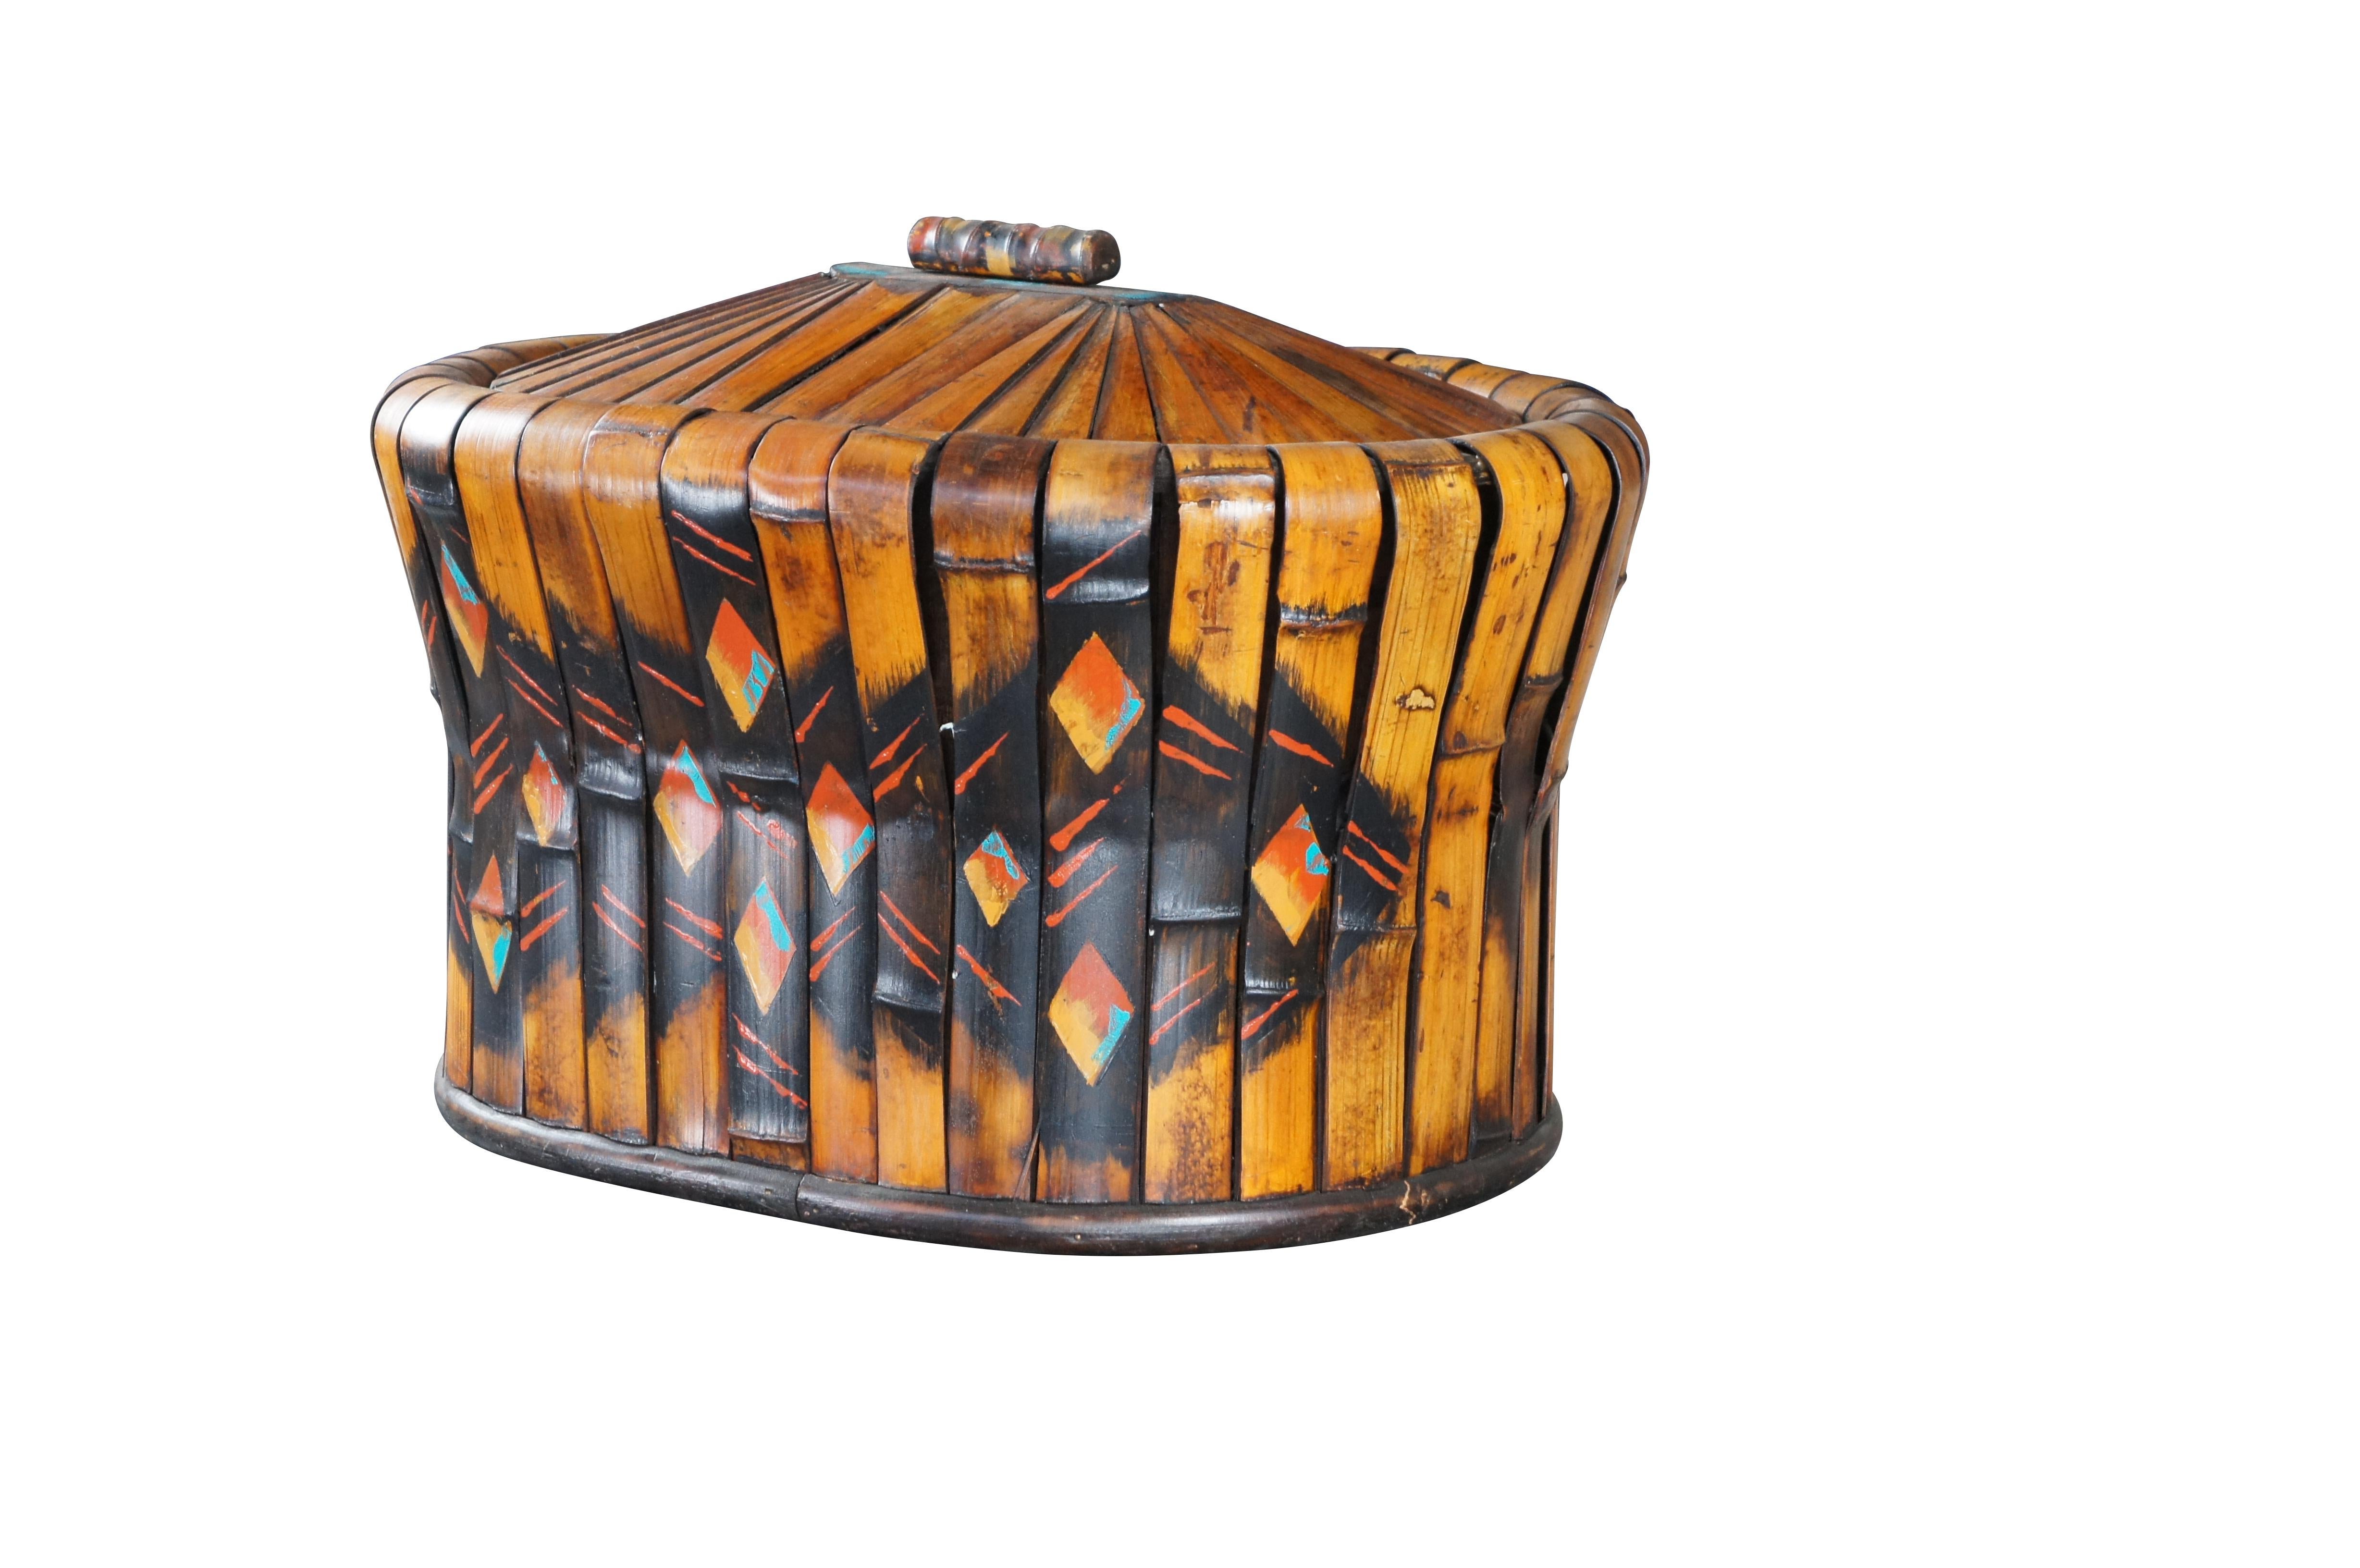 Intriguing modern bamboo case or basket. Features a decorated bamboo wrapped exterior and lid. Great for display or use.

Dimensions:
20.5